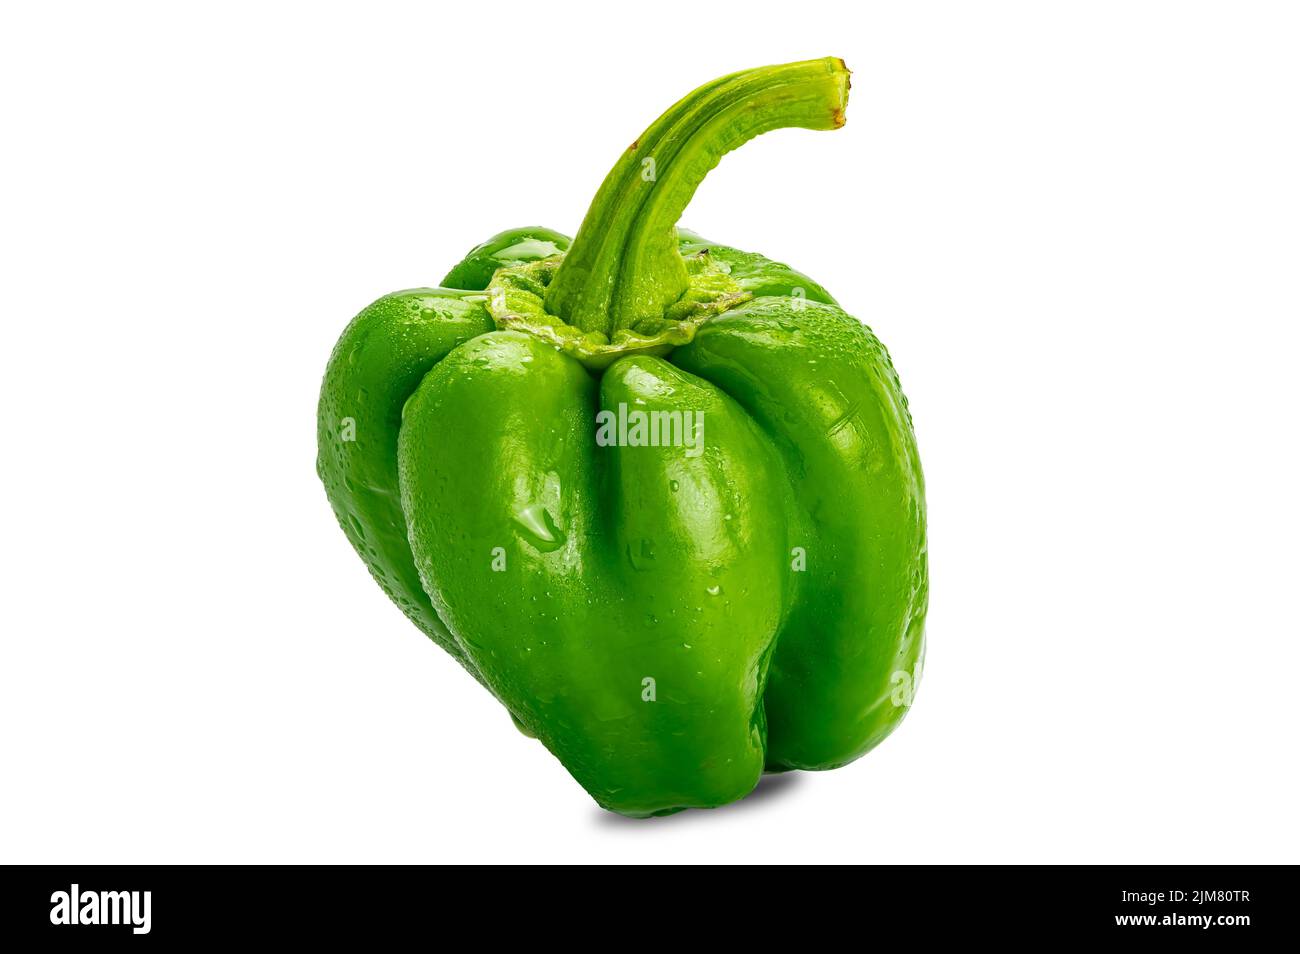 Single fresh green bell pepper or paprika or capsicum isolated on white background with clipping path. Stock Photo